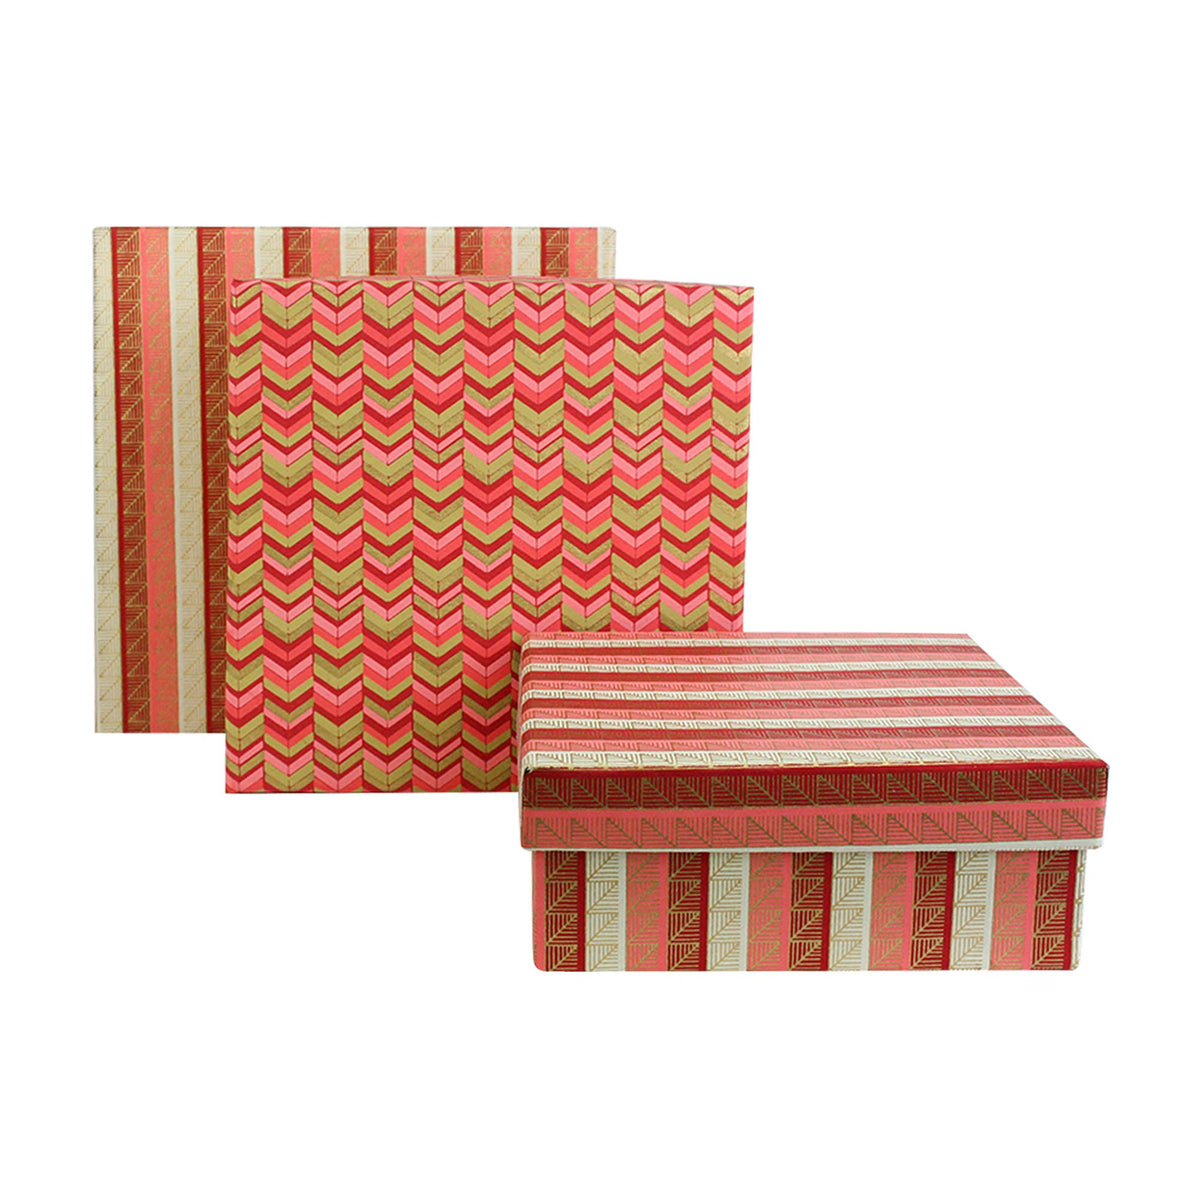 Handmade Chevron Patterned Red/Gold Gift Boxes - Set of 3